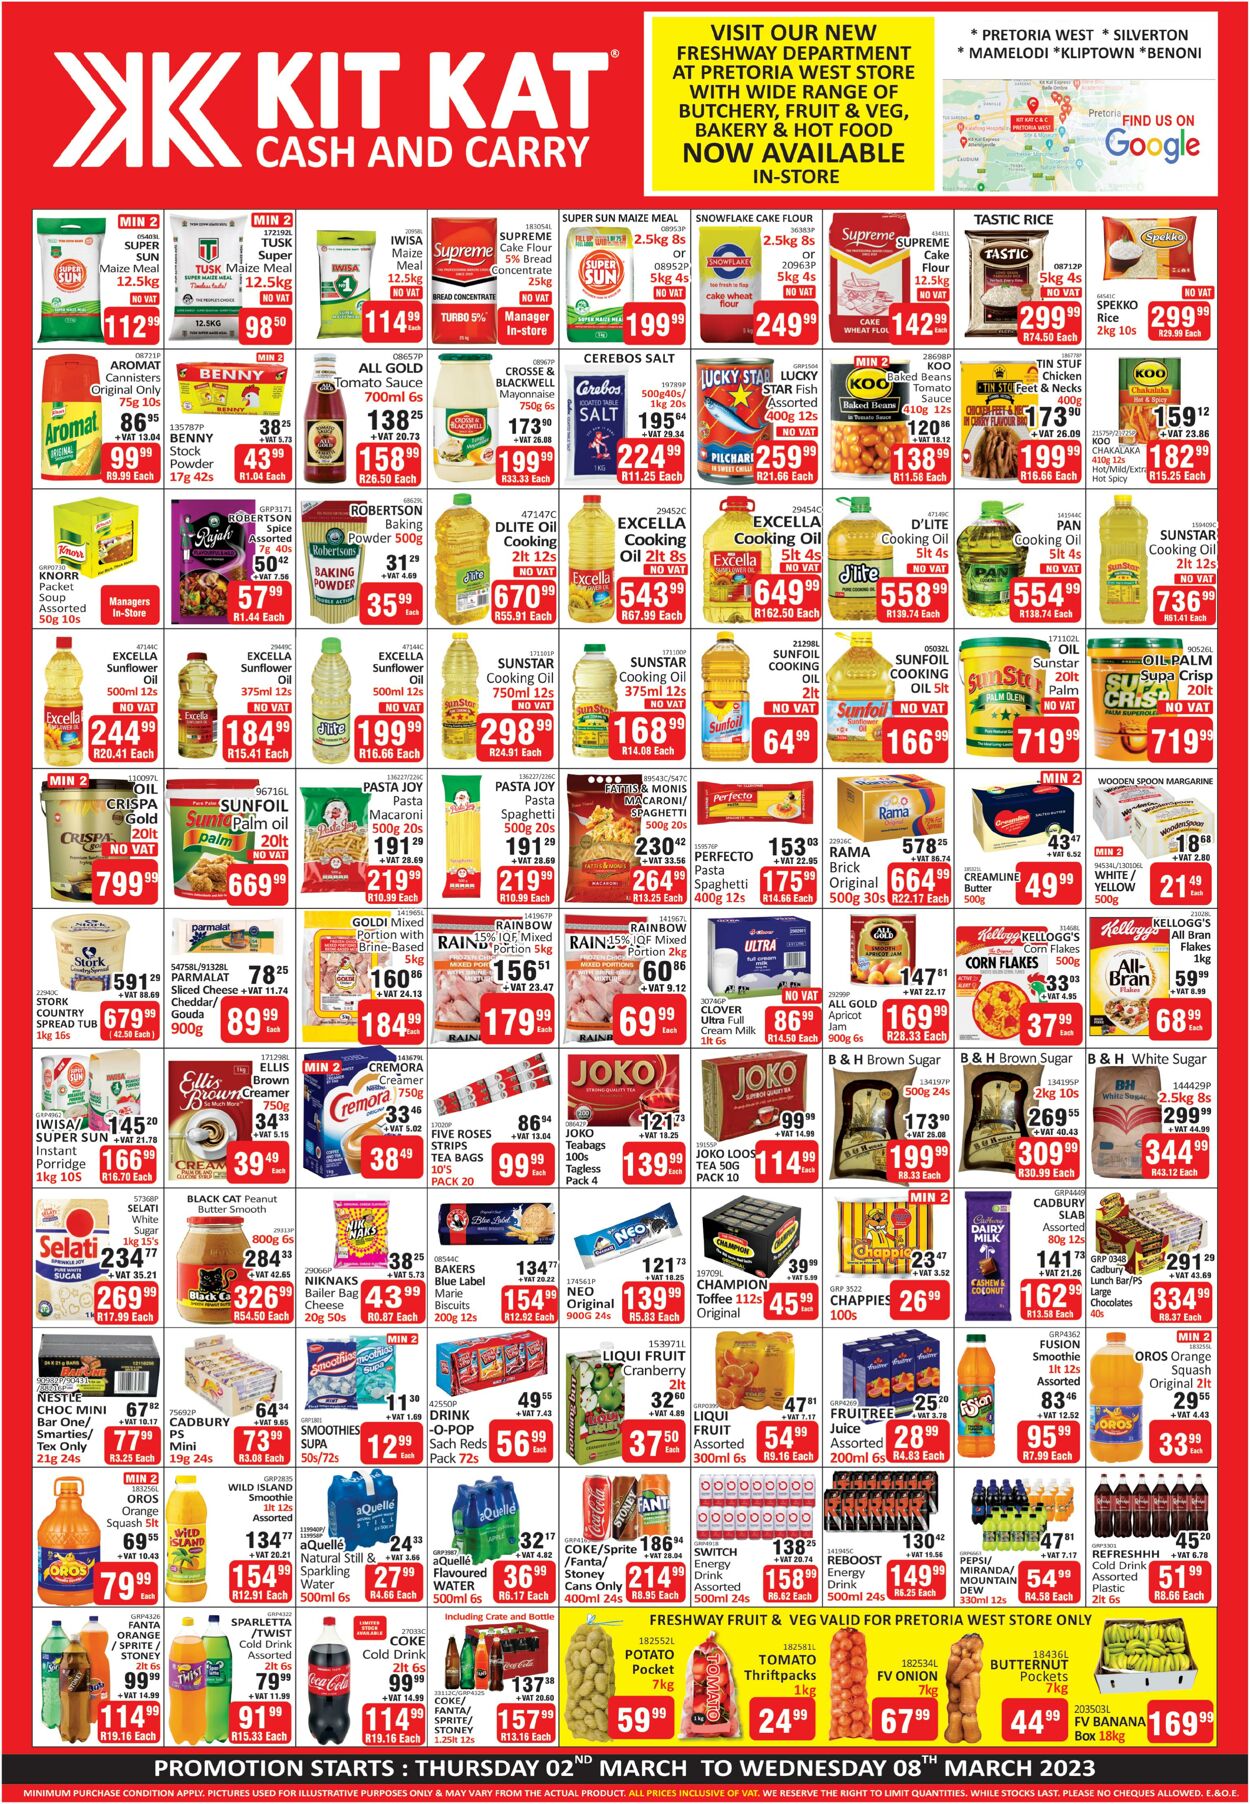 Special Kit Kat Cash and Carry 02.03.2023 - 08.03.2023